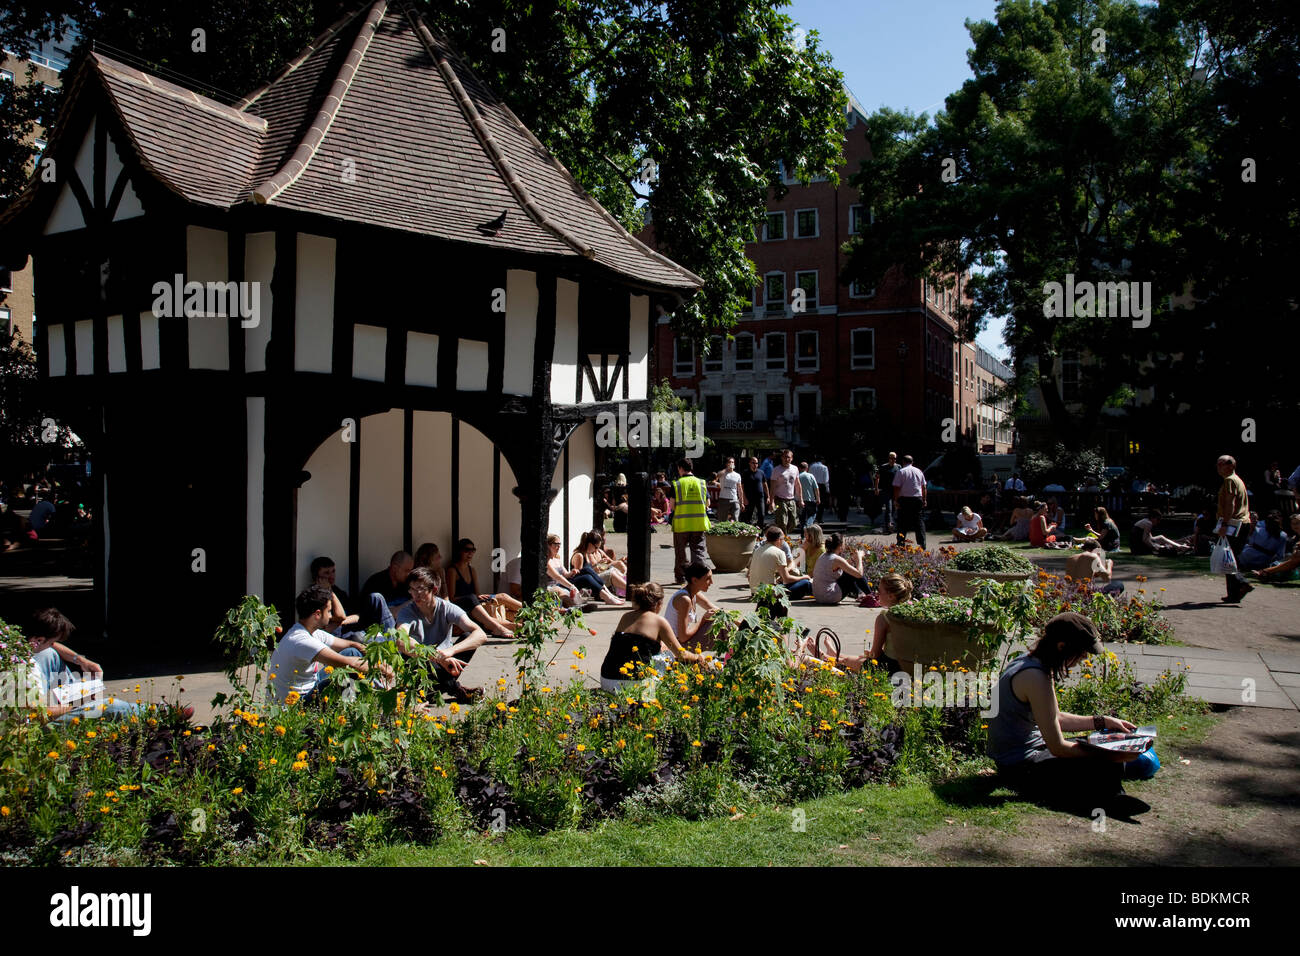 People gather to relax in the sunshine at lunchtime in Soho Square (also known as Soho Beach) in central London. Stock Photo